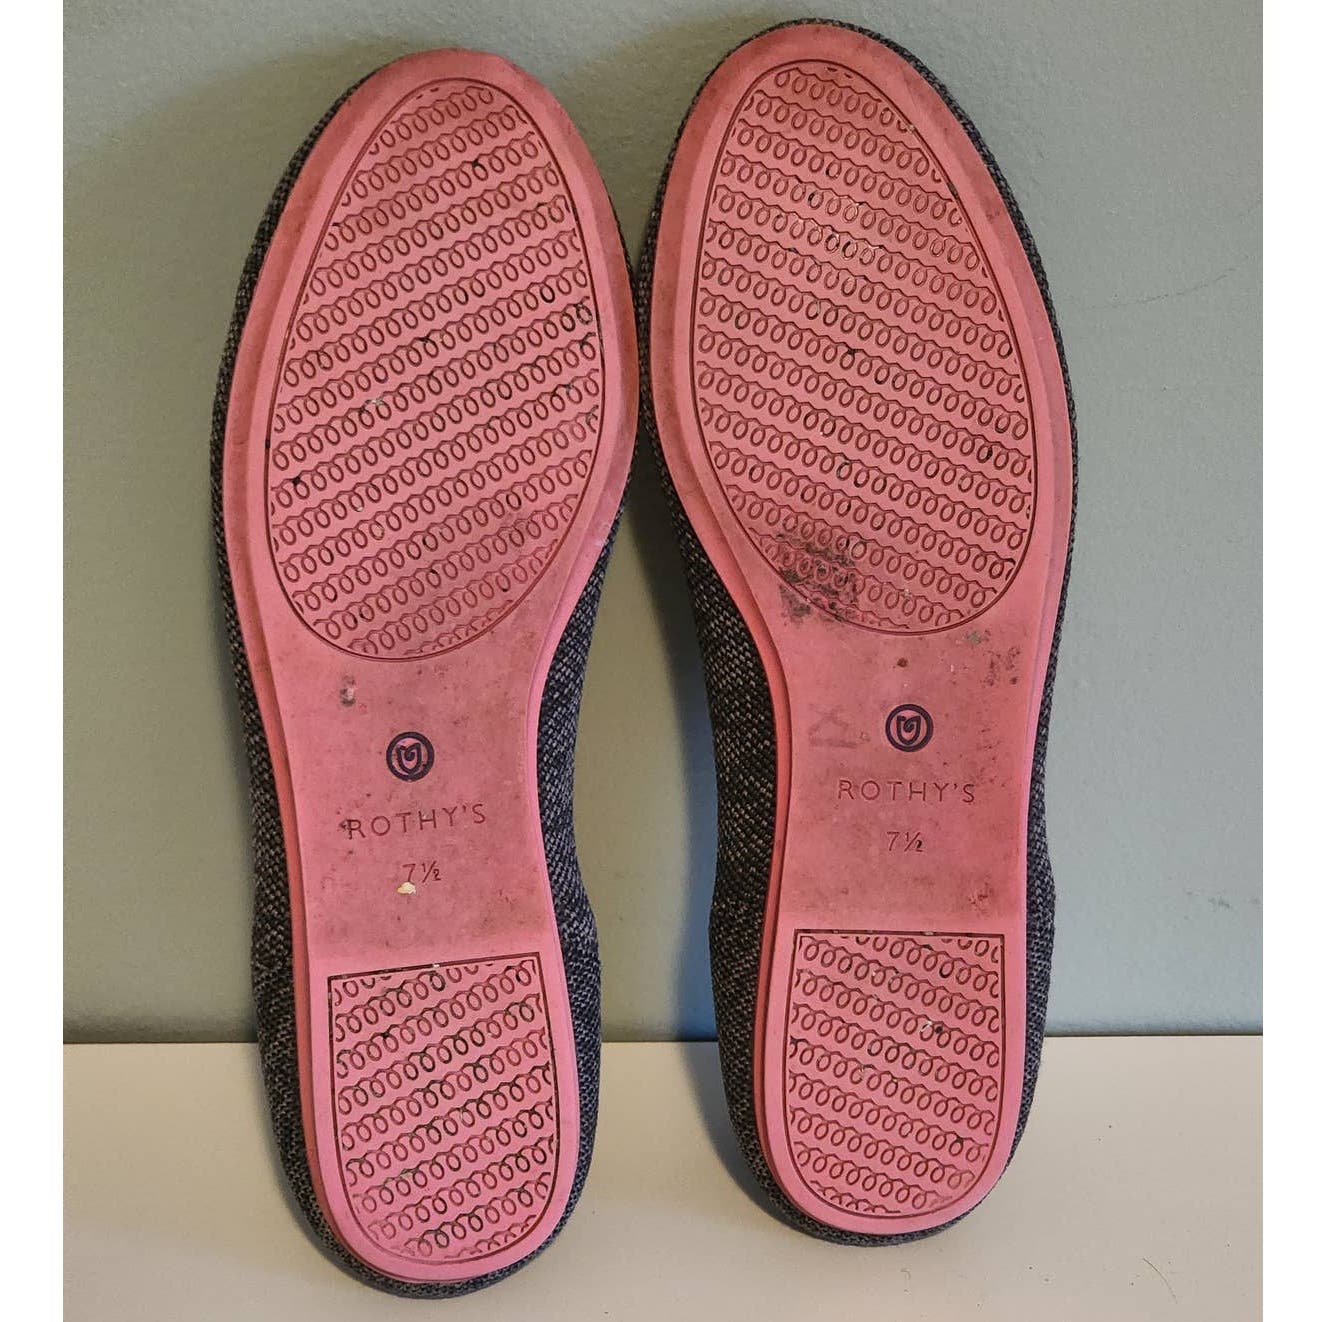 Rothy's Gray Birdseye Flats with Pink Soles Size 7.5